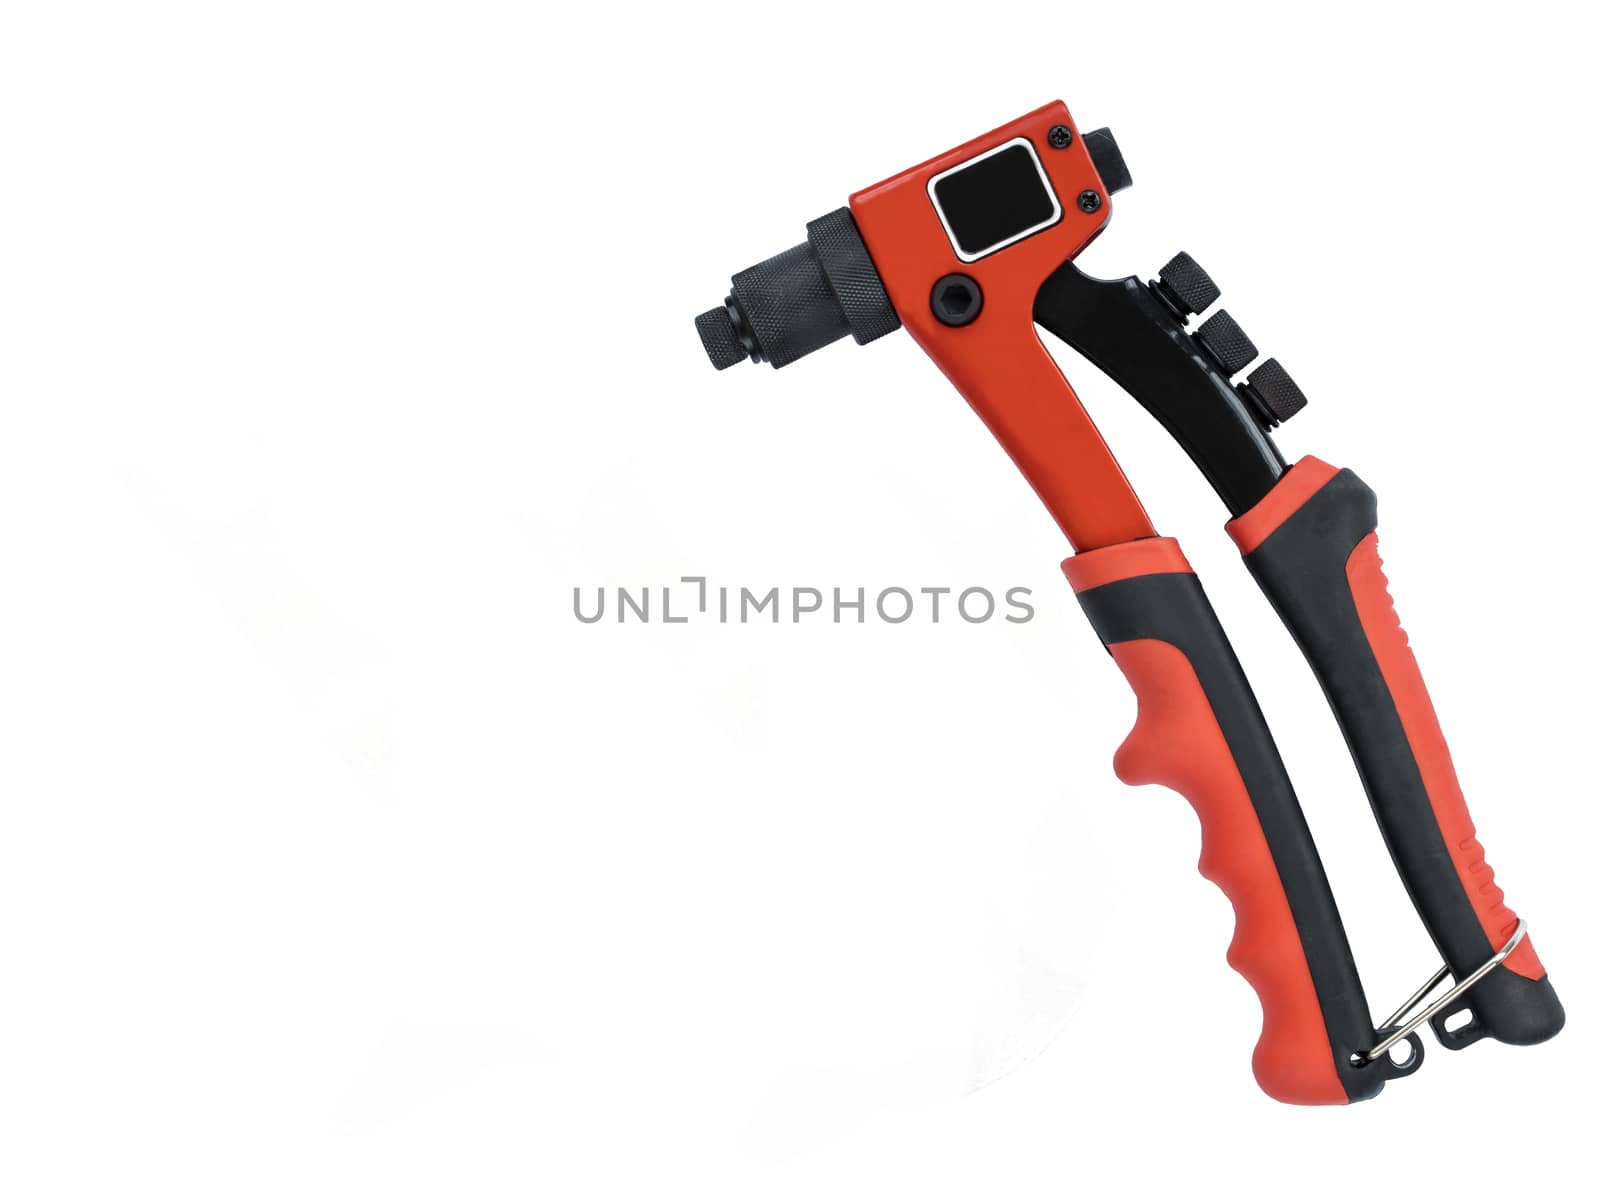 New red professional riveting gun on isolated white background